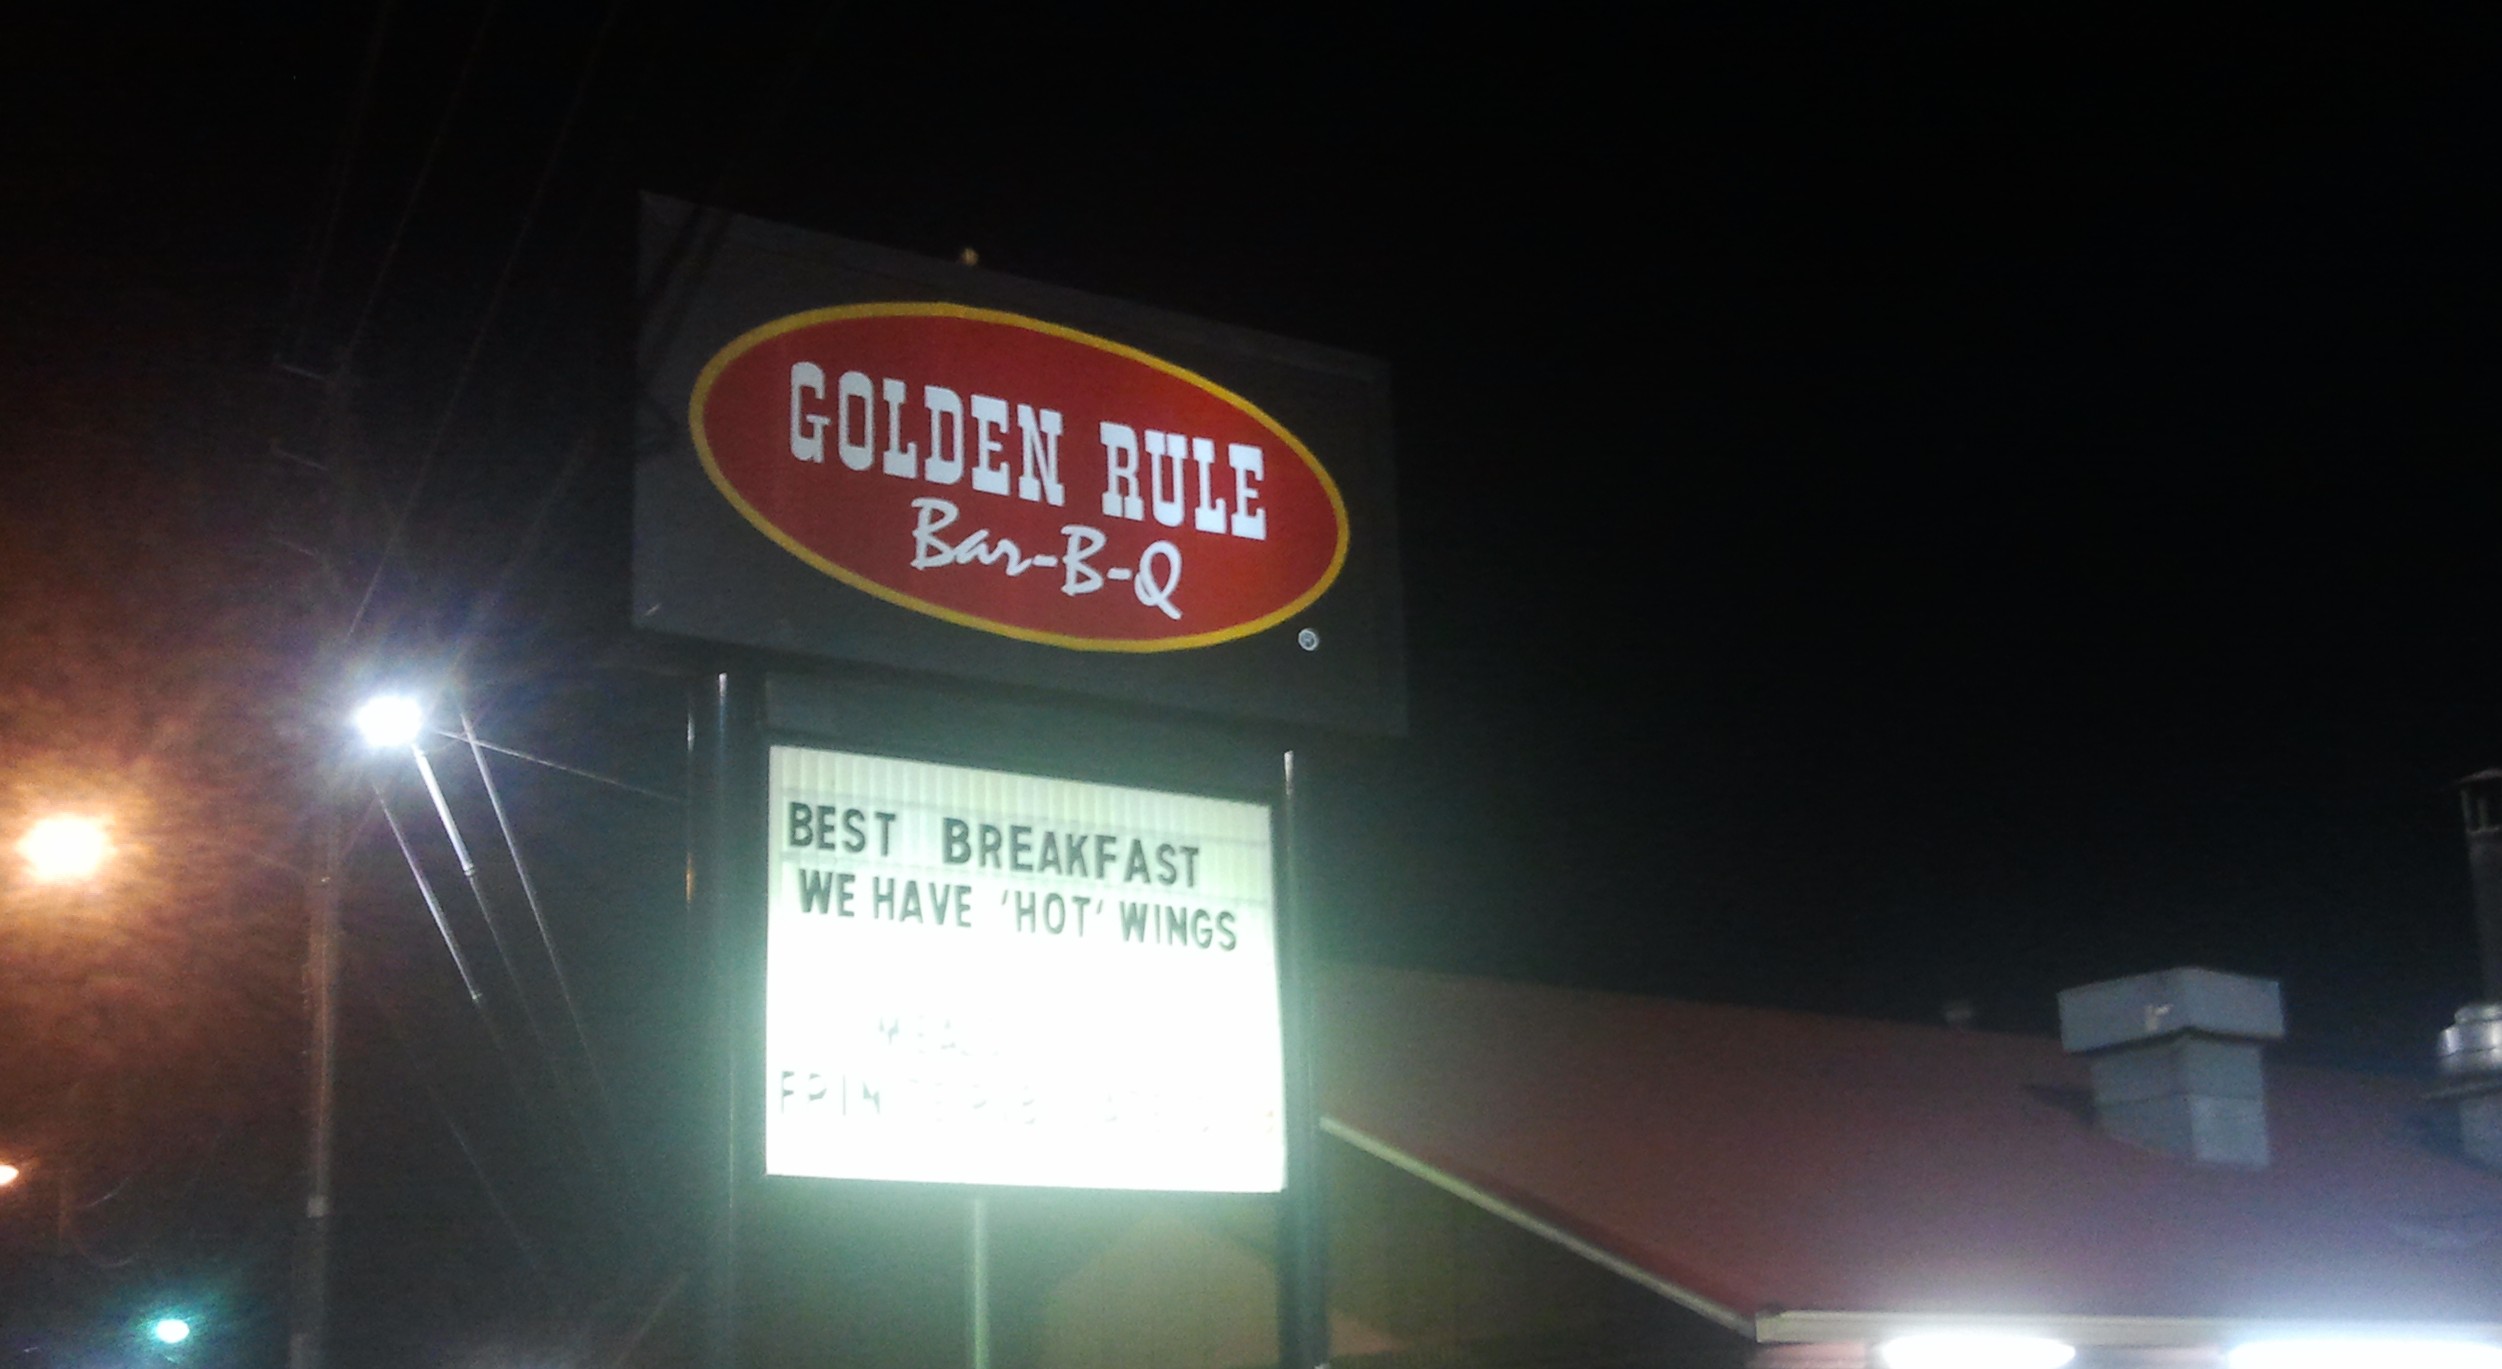 Small fire at Golden Rule will delay opening on Tuesday